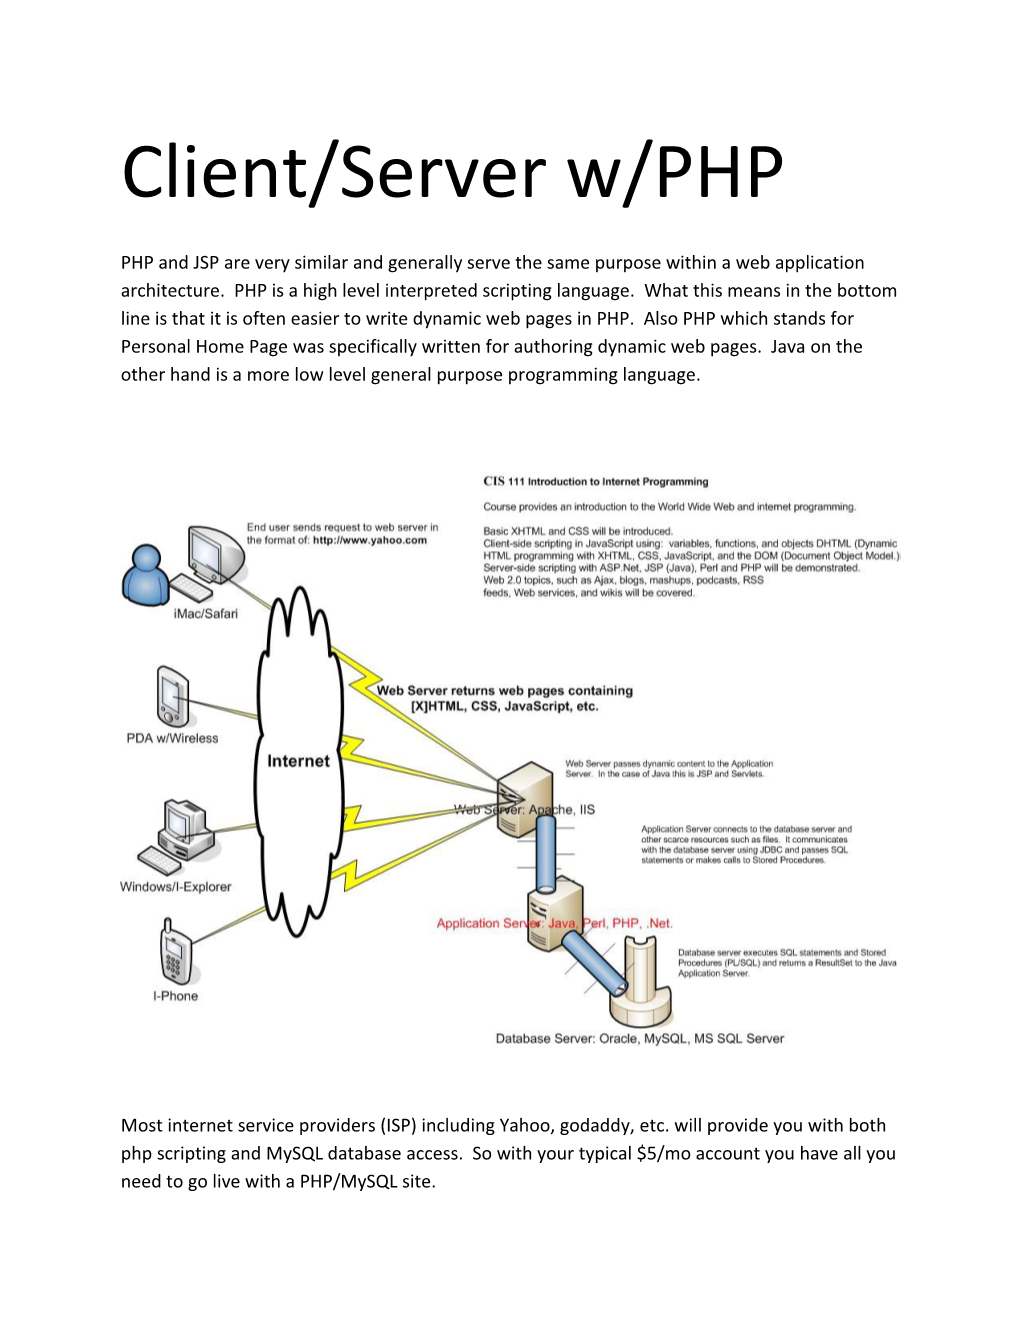 Client/Server W/PHP